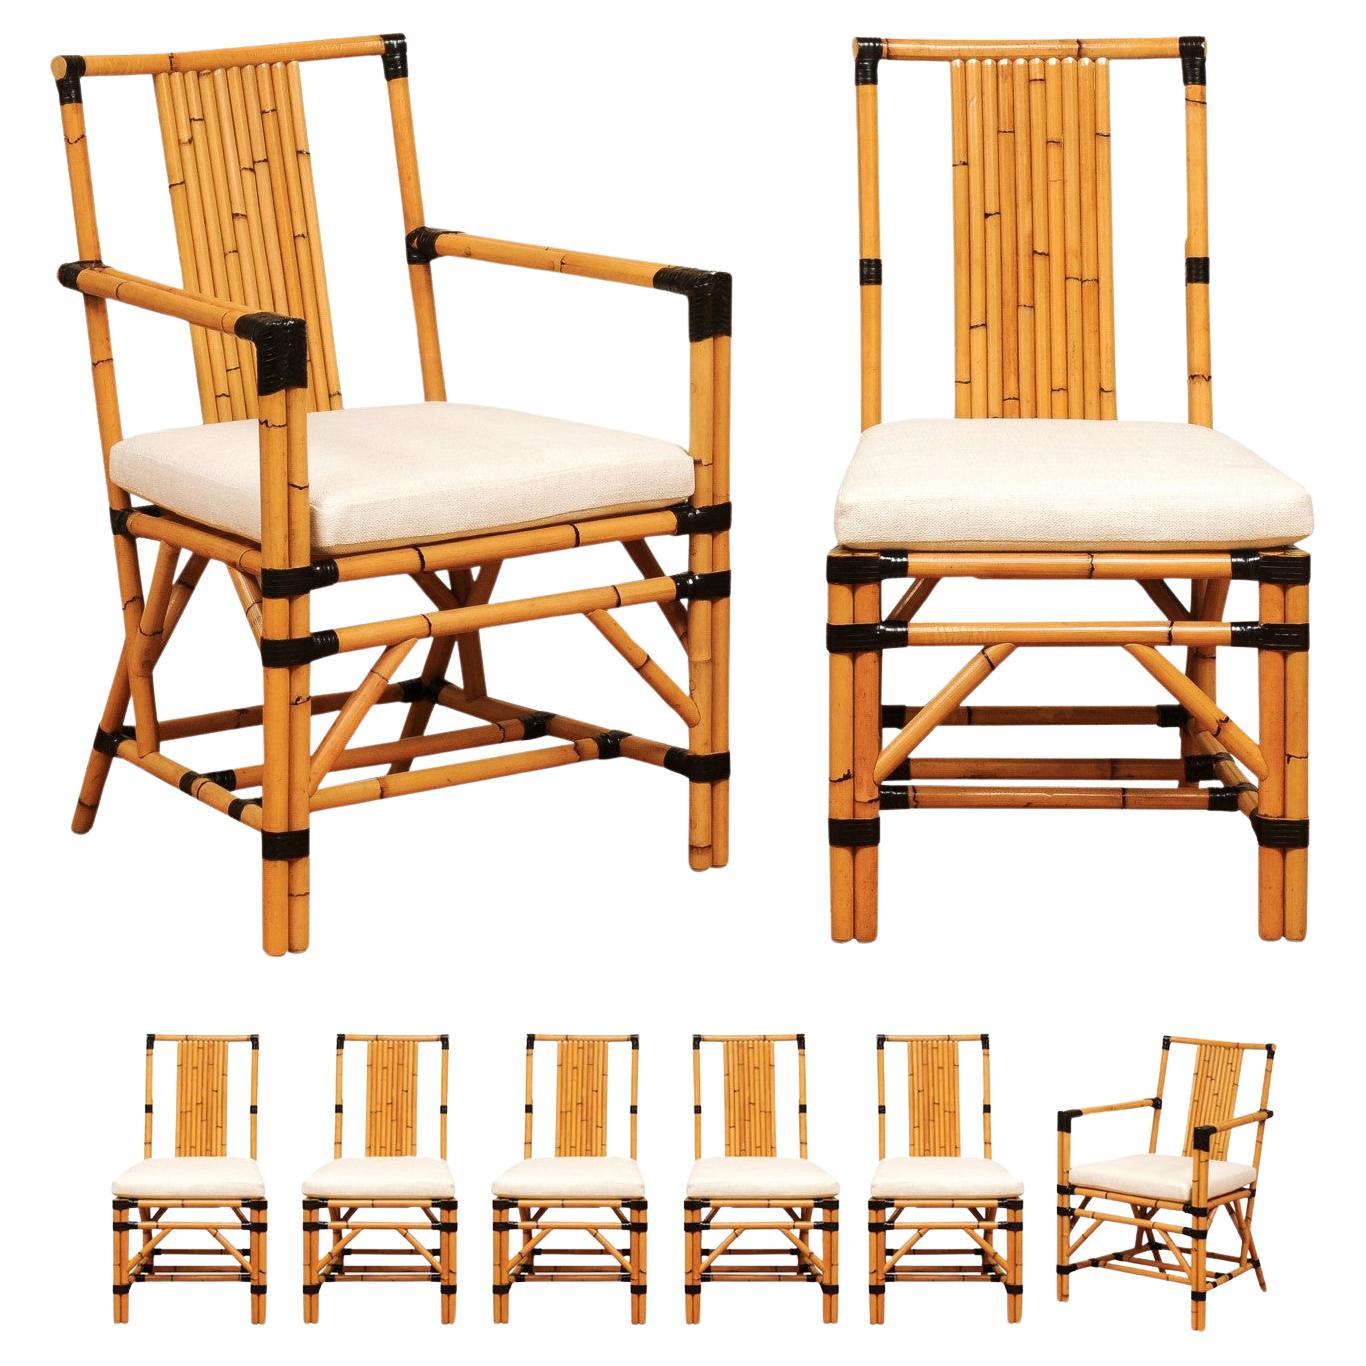 Dramatic Set of 8 Vintage John Hutton for Sutherland Cane Wicker Bamboo Chairs